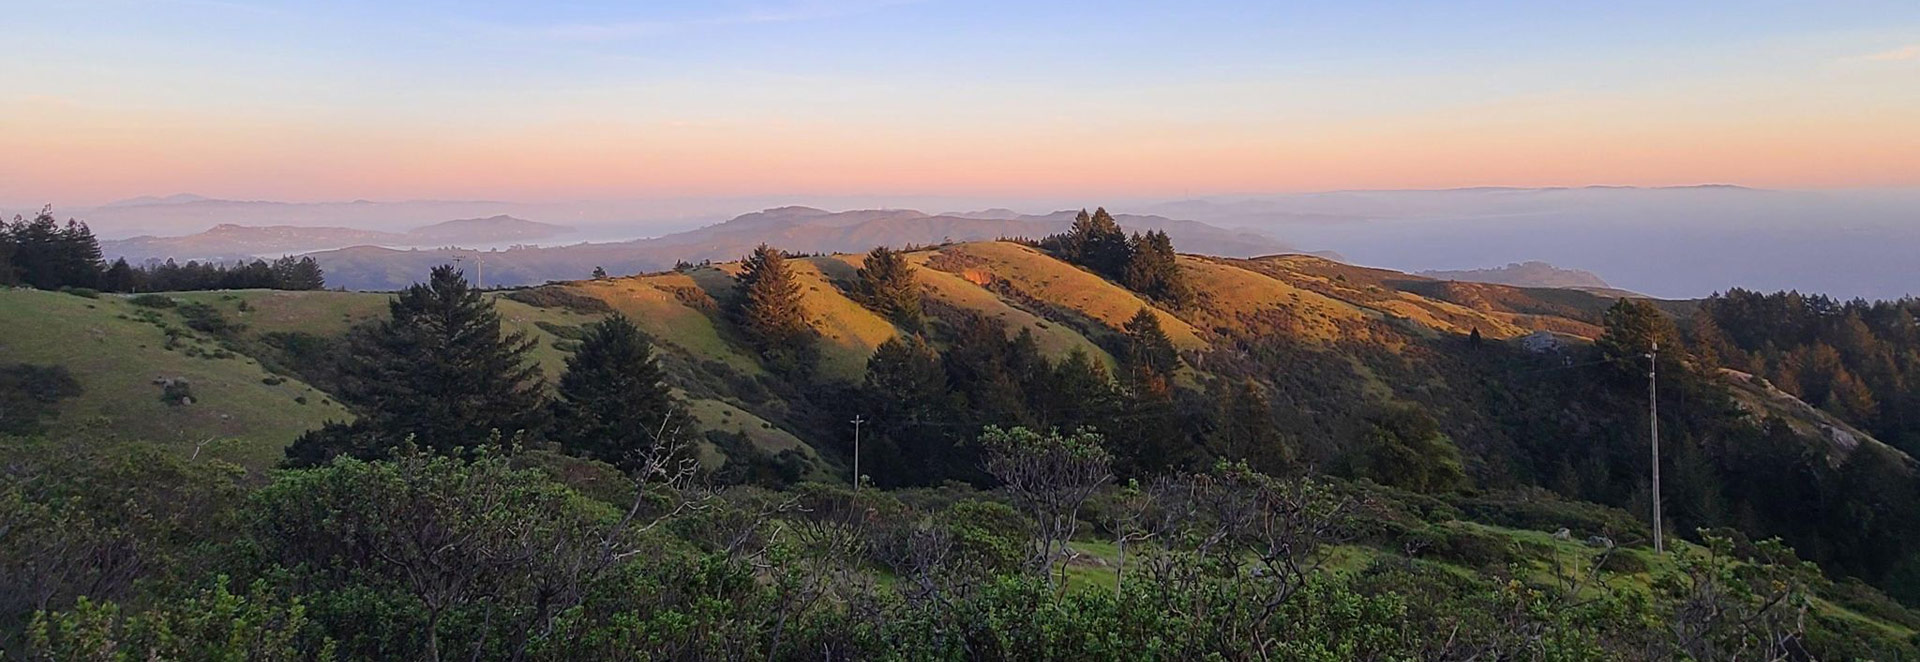 View from Mt. Tam